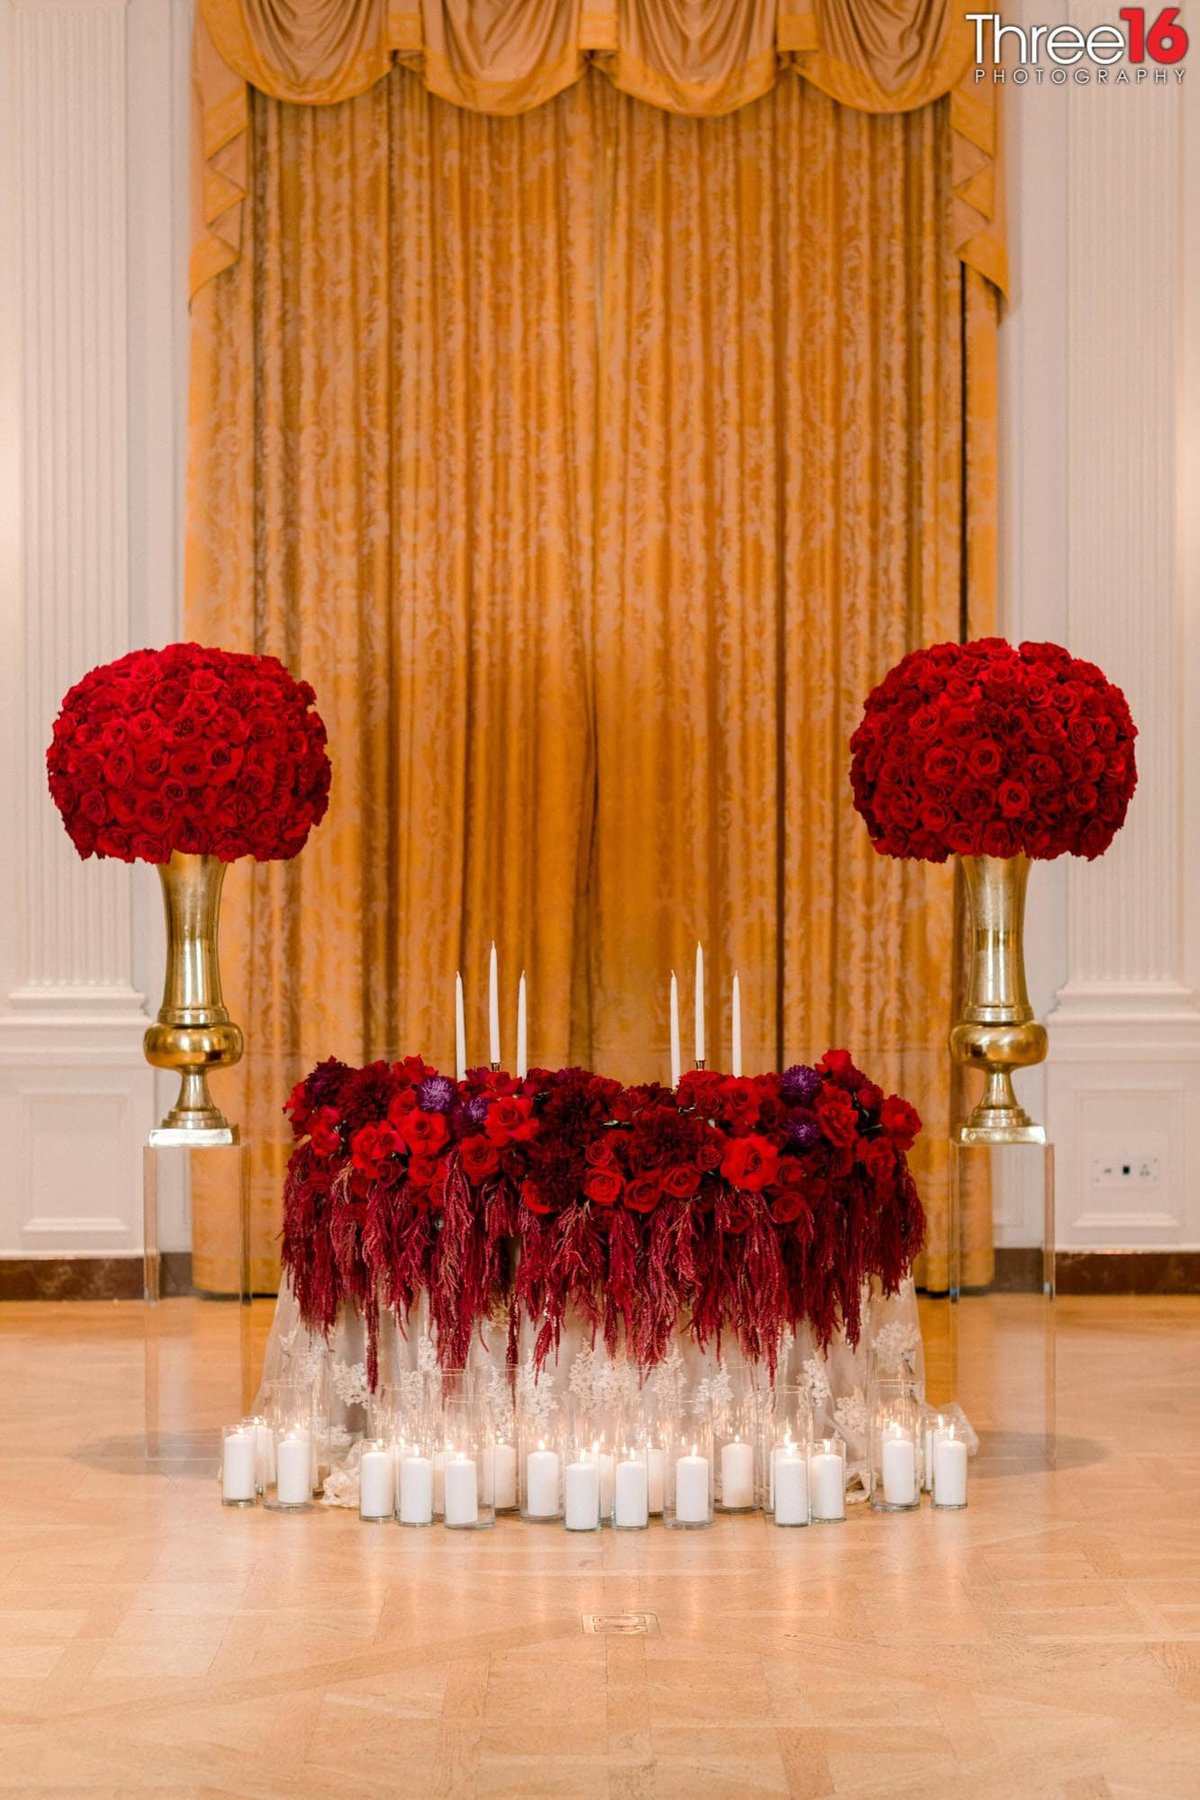 Amazing Sweetheart Table display for a wedding reception